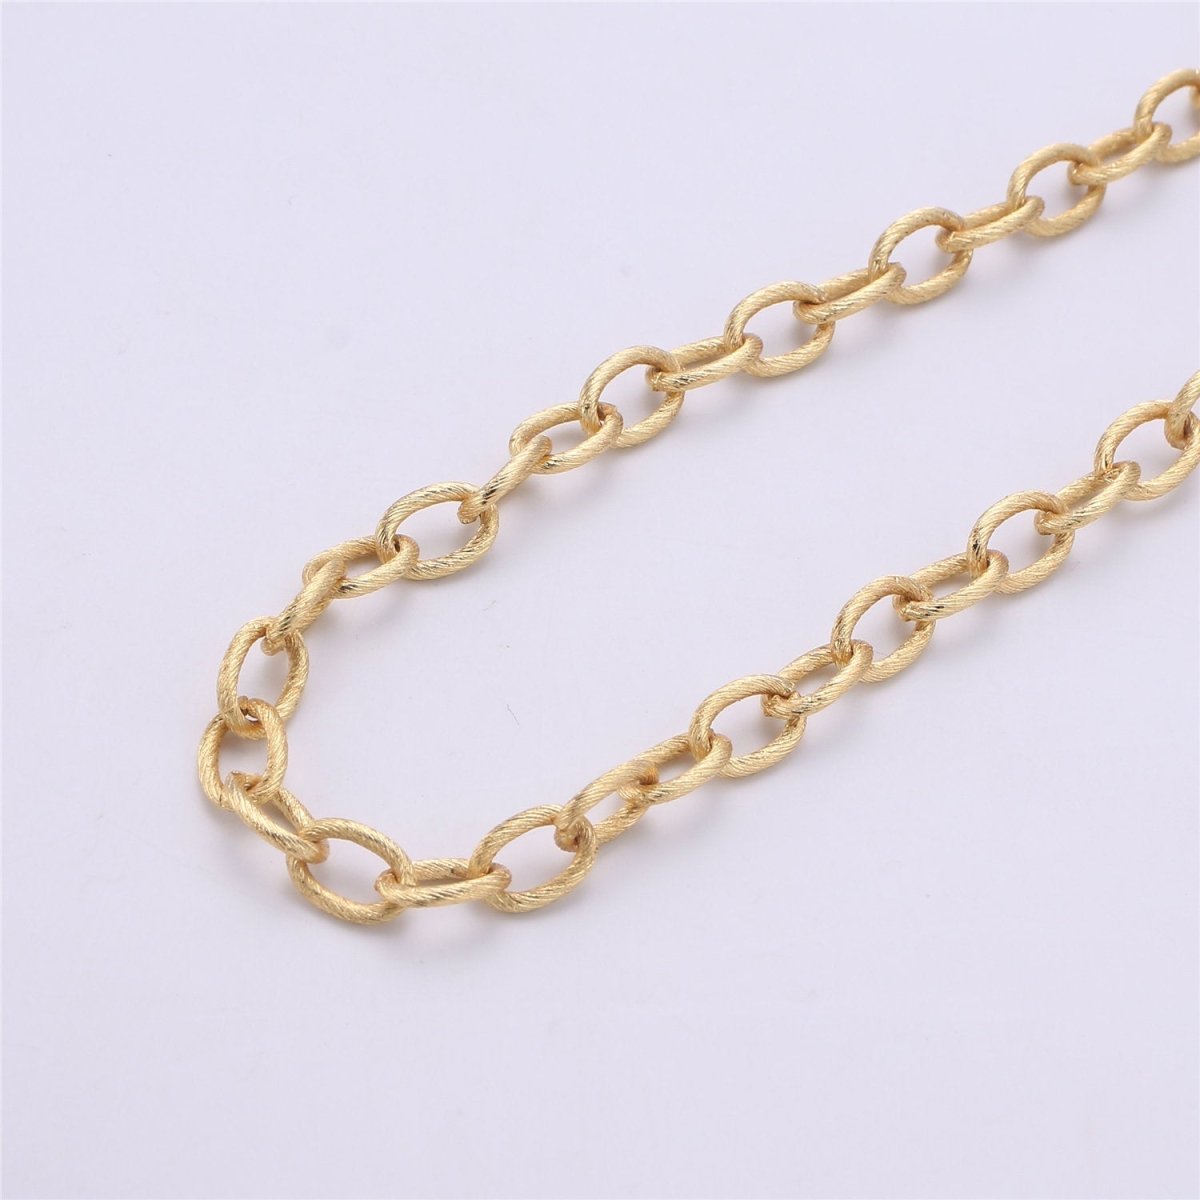 Thick Rolo Cable 14K Gold Filled Chain Necklace, Chunky Chain by Yard Thick Chain 14K GF Faceted Oval Chain Necklace 10x7mm, Textured CABLE Chain | ROLL-063 Clearance Pricing - DLUXCA